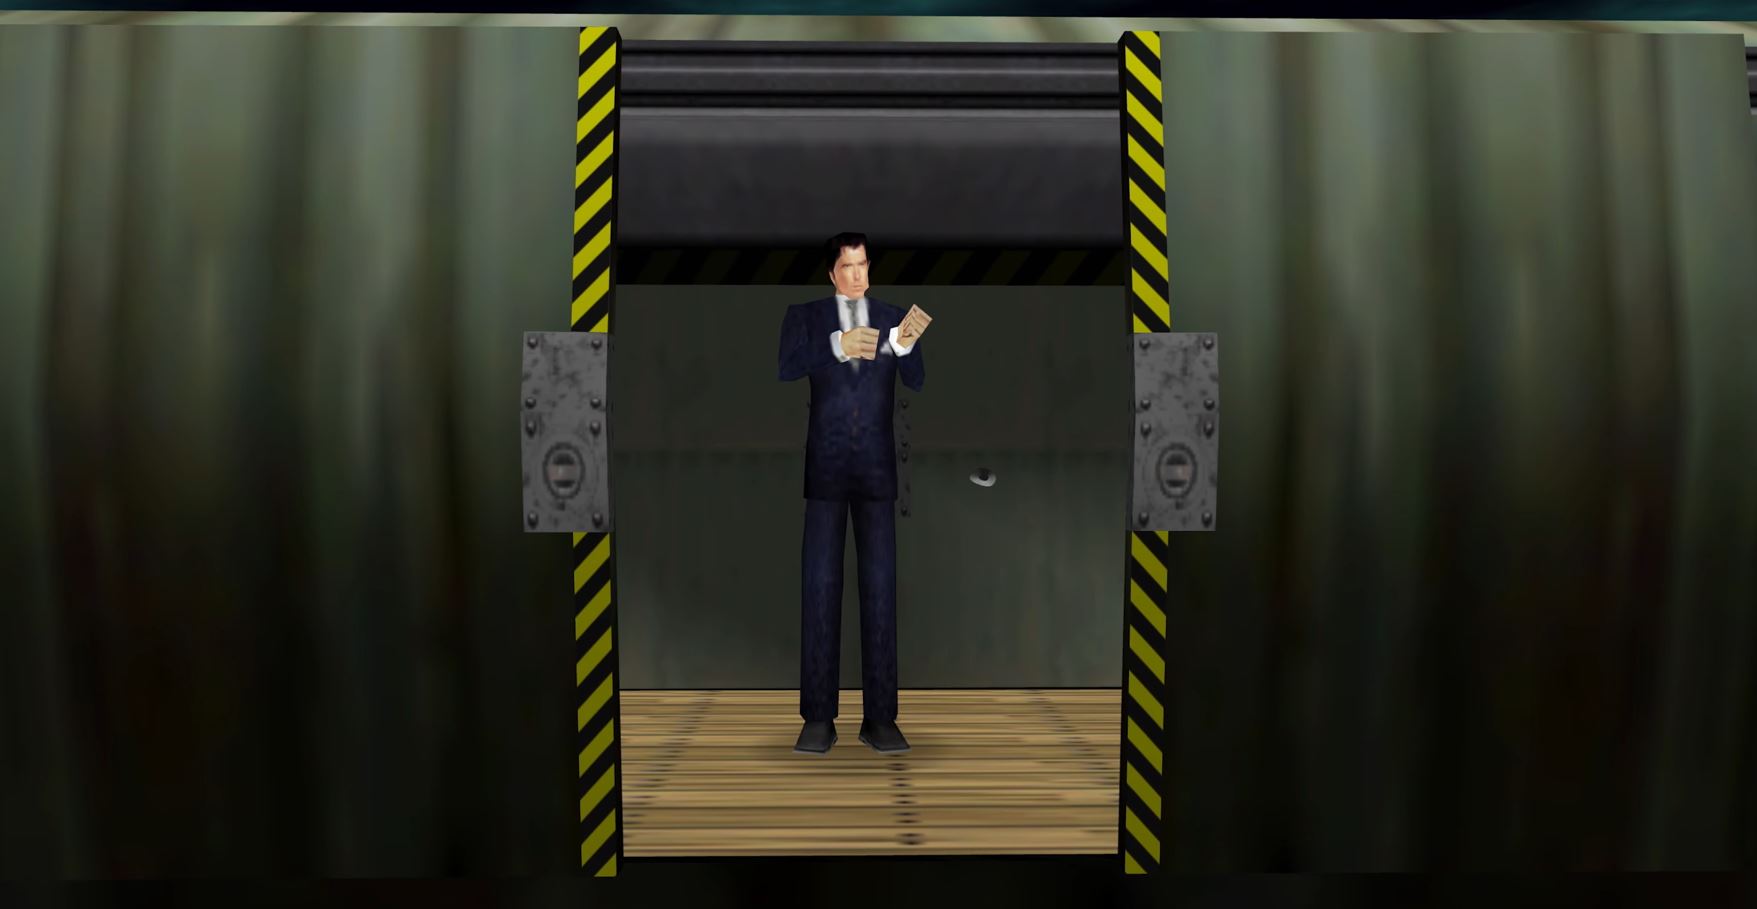 GoldenEye 007 remaster might actually release soon, according to